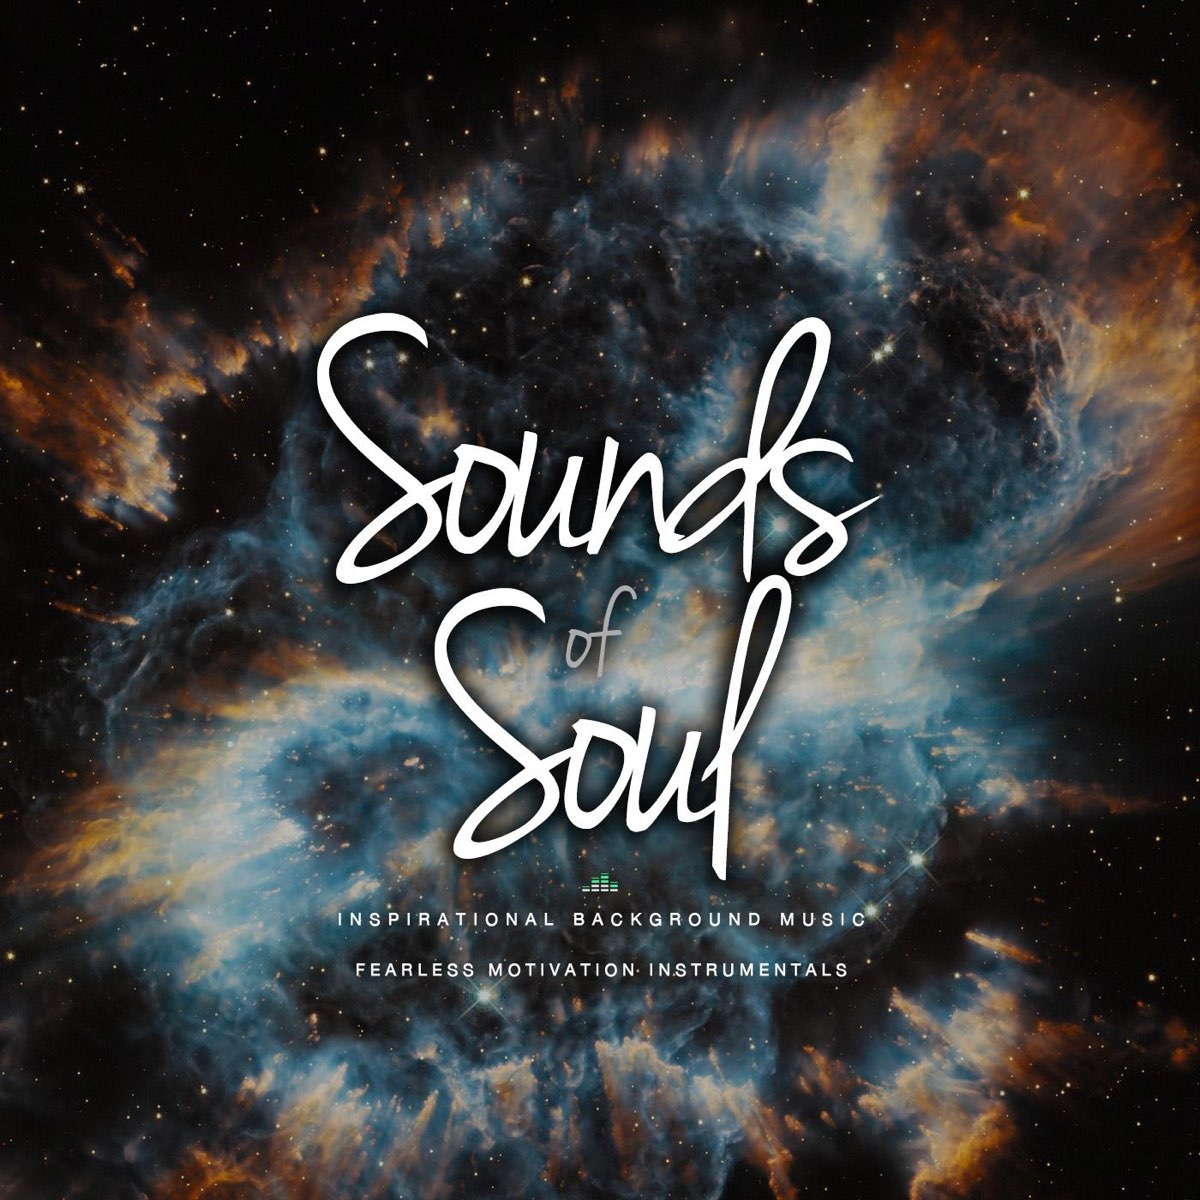 Sounds of Soul (Inspirational Background Music) by Fearless Motivation  Instrumentals & Fearless Soul on Apple Music